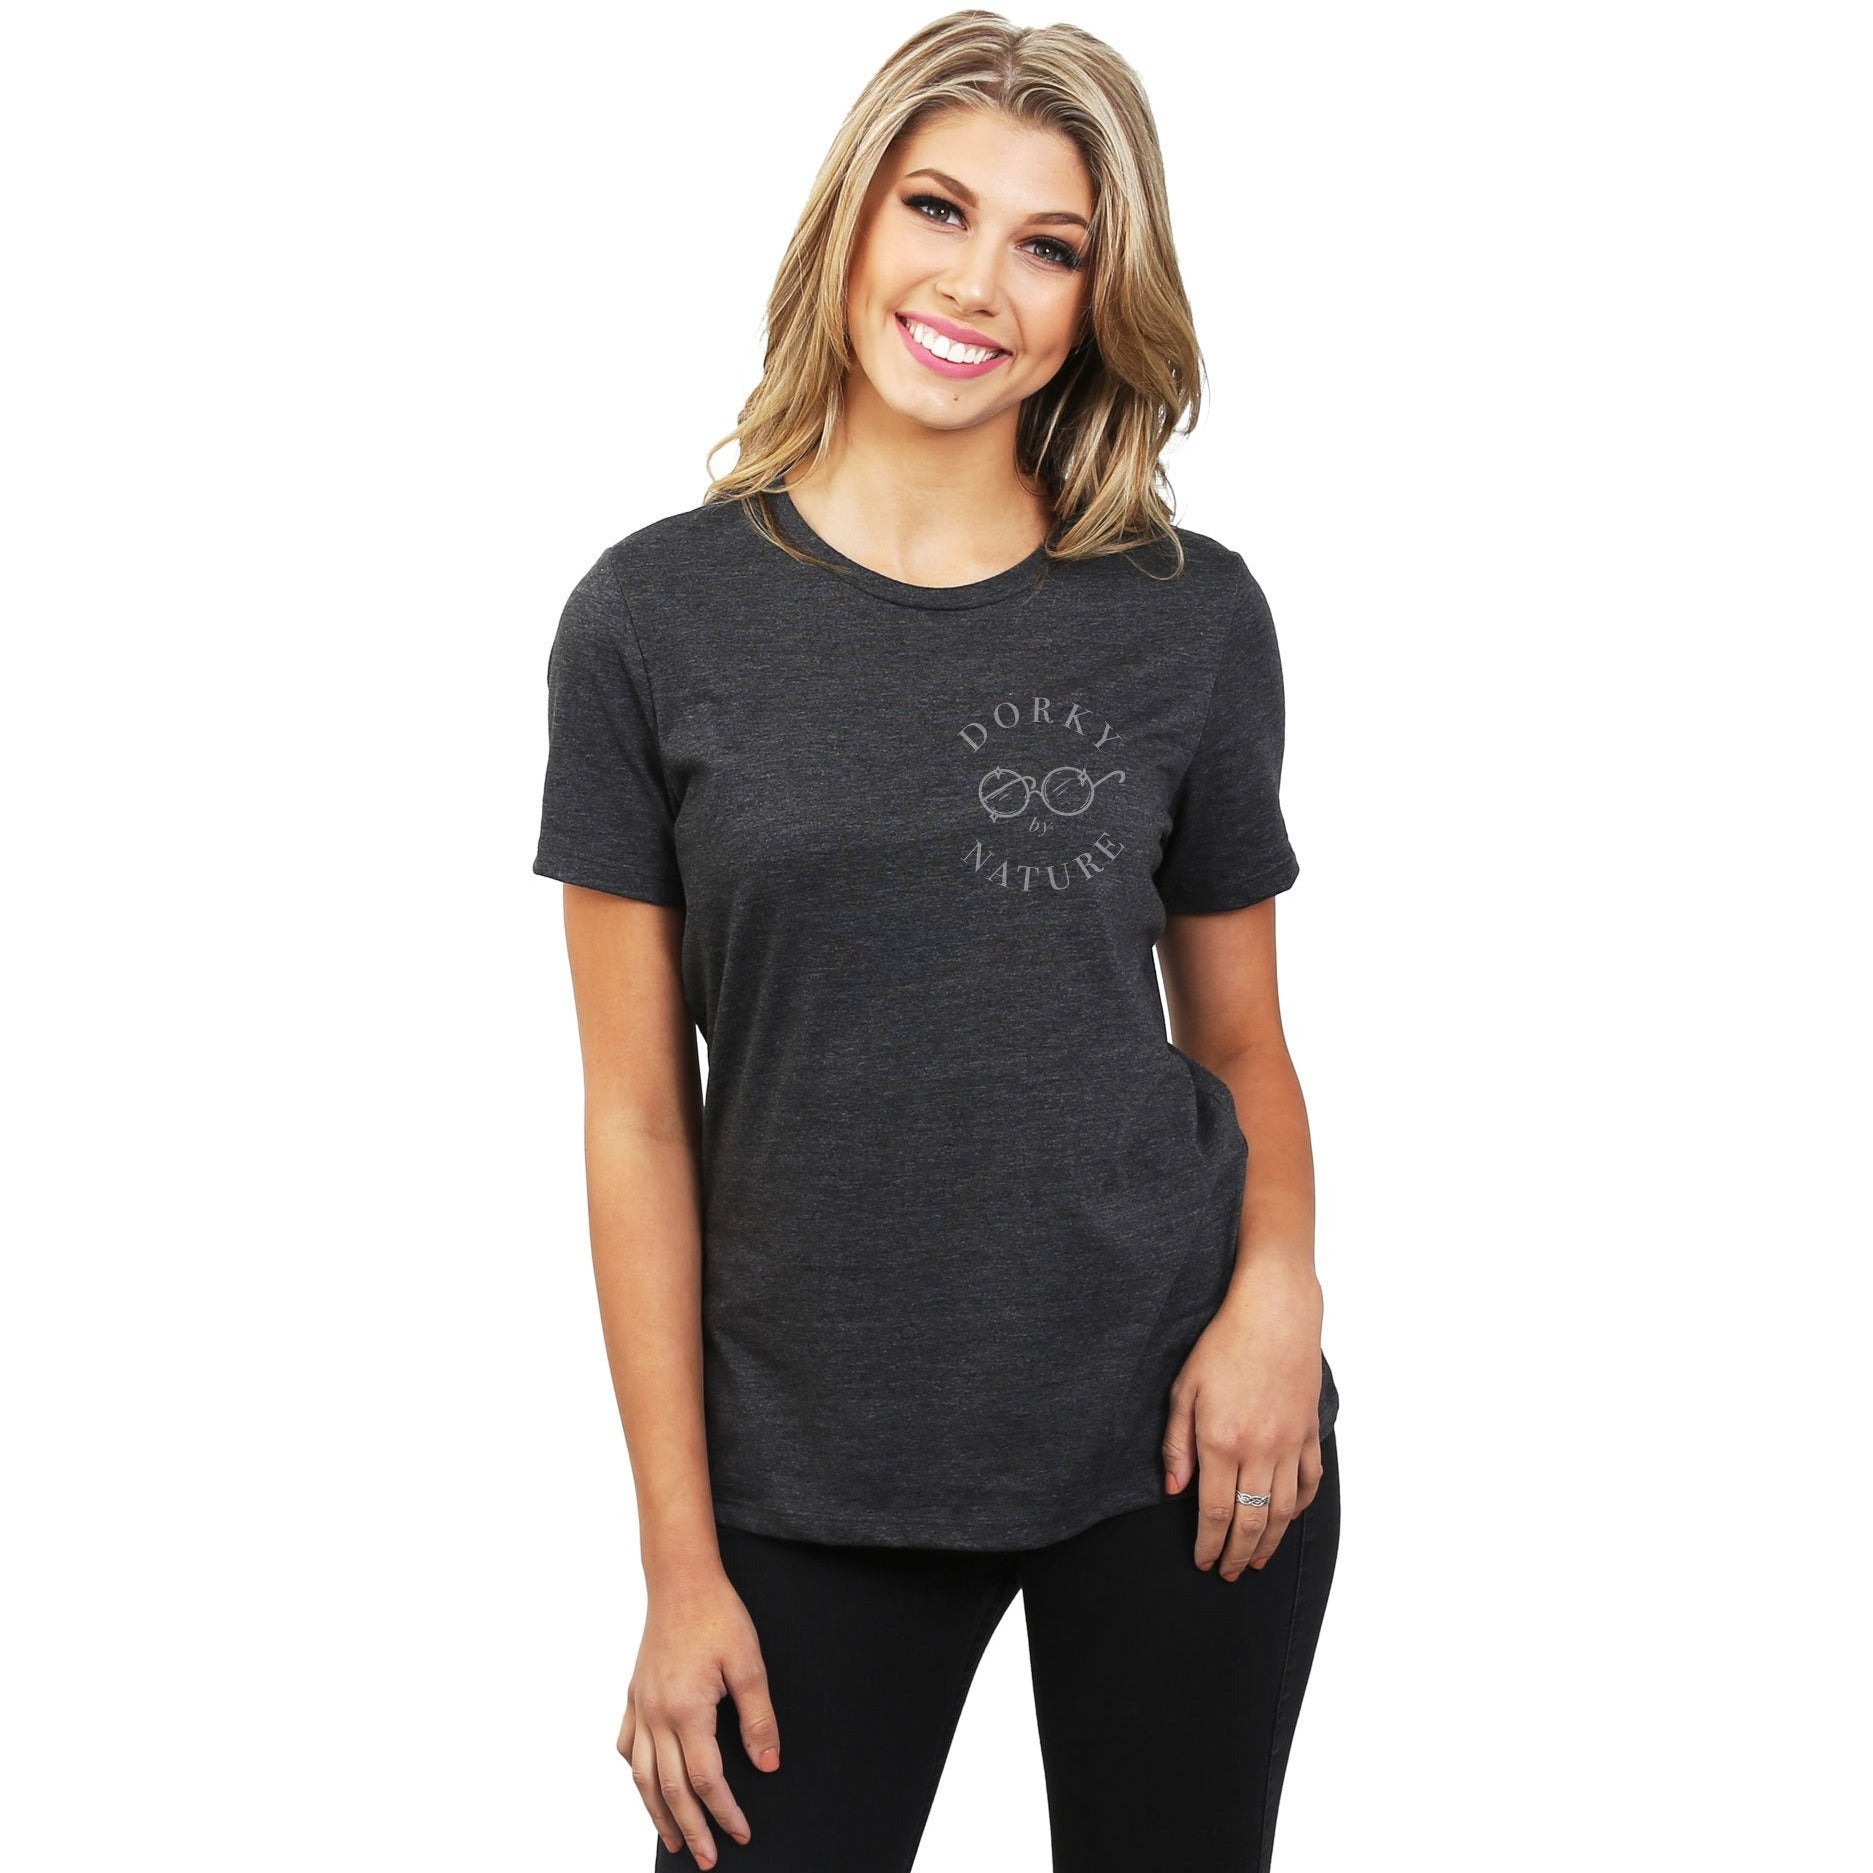 Dorky By Nature Women's Relaxed Crewneck T-Shirt Top Tee Charcoal Model
